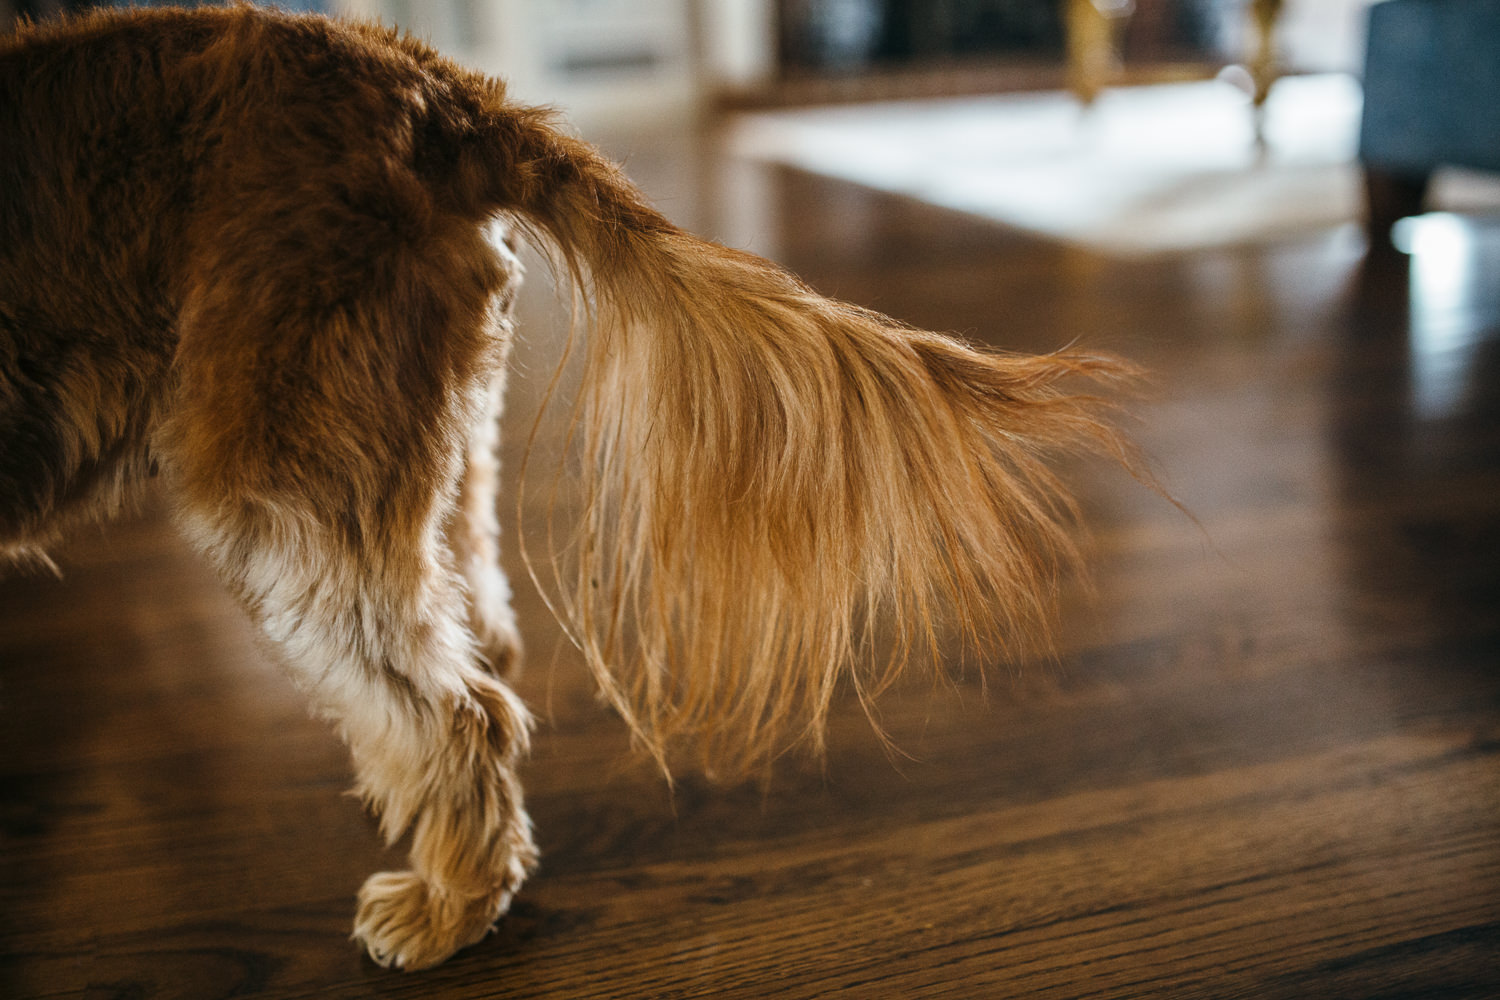 close up image of a dogs tail with fur hanging